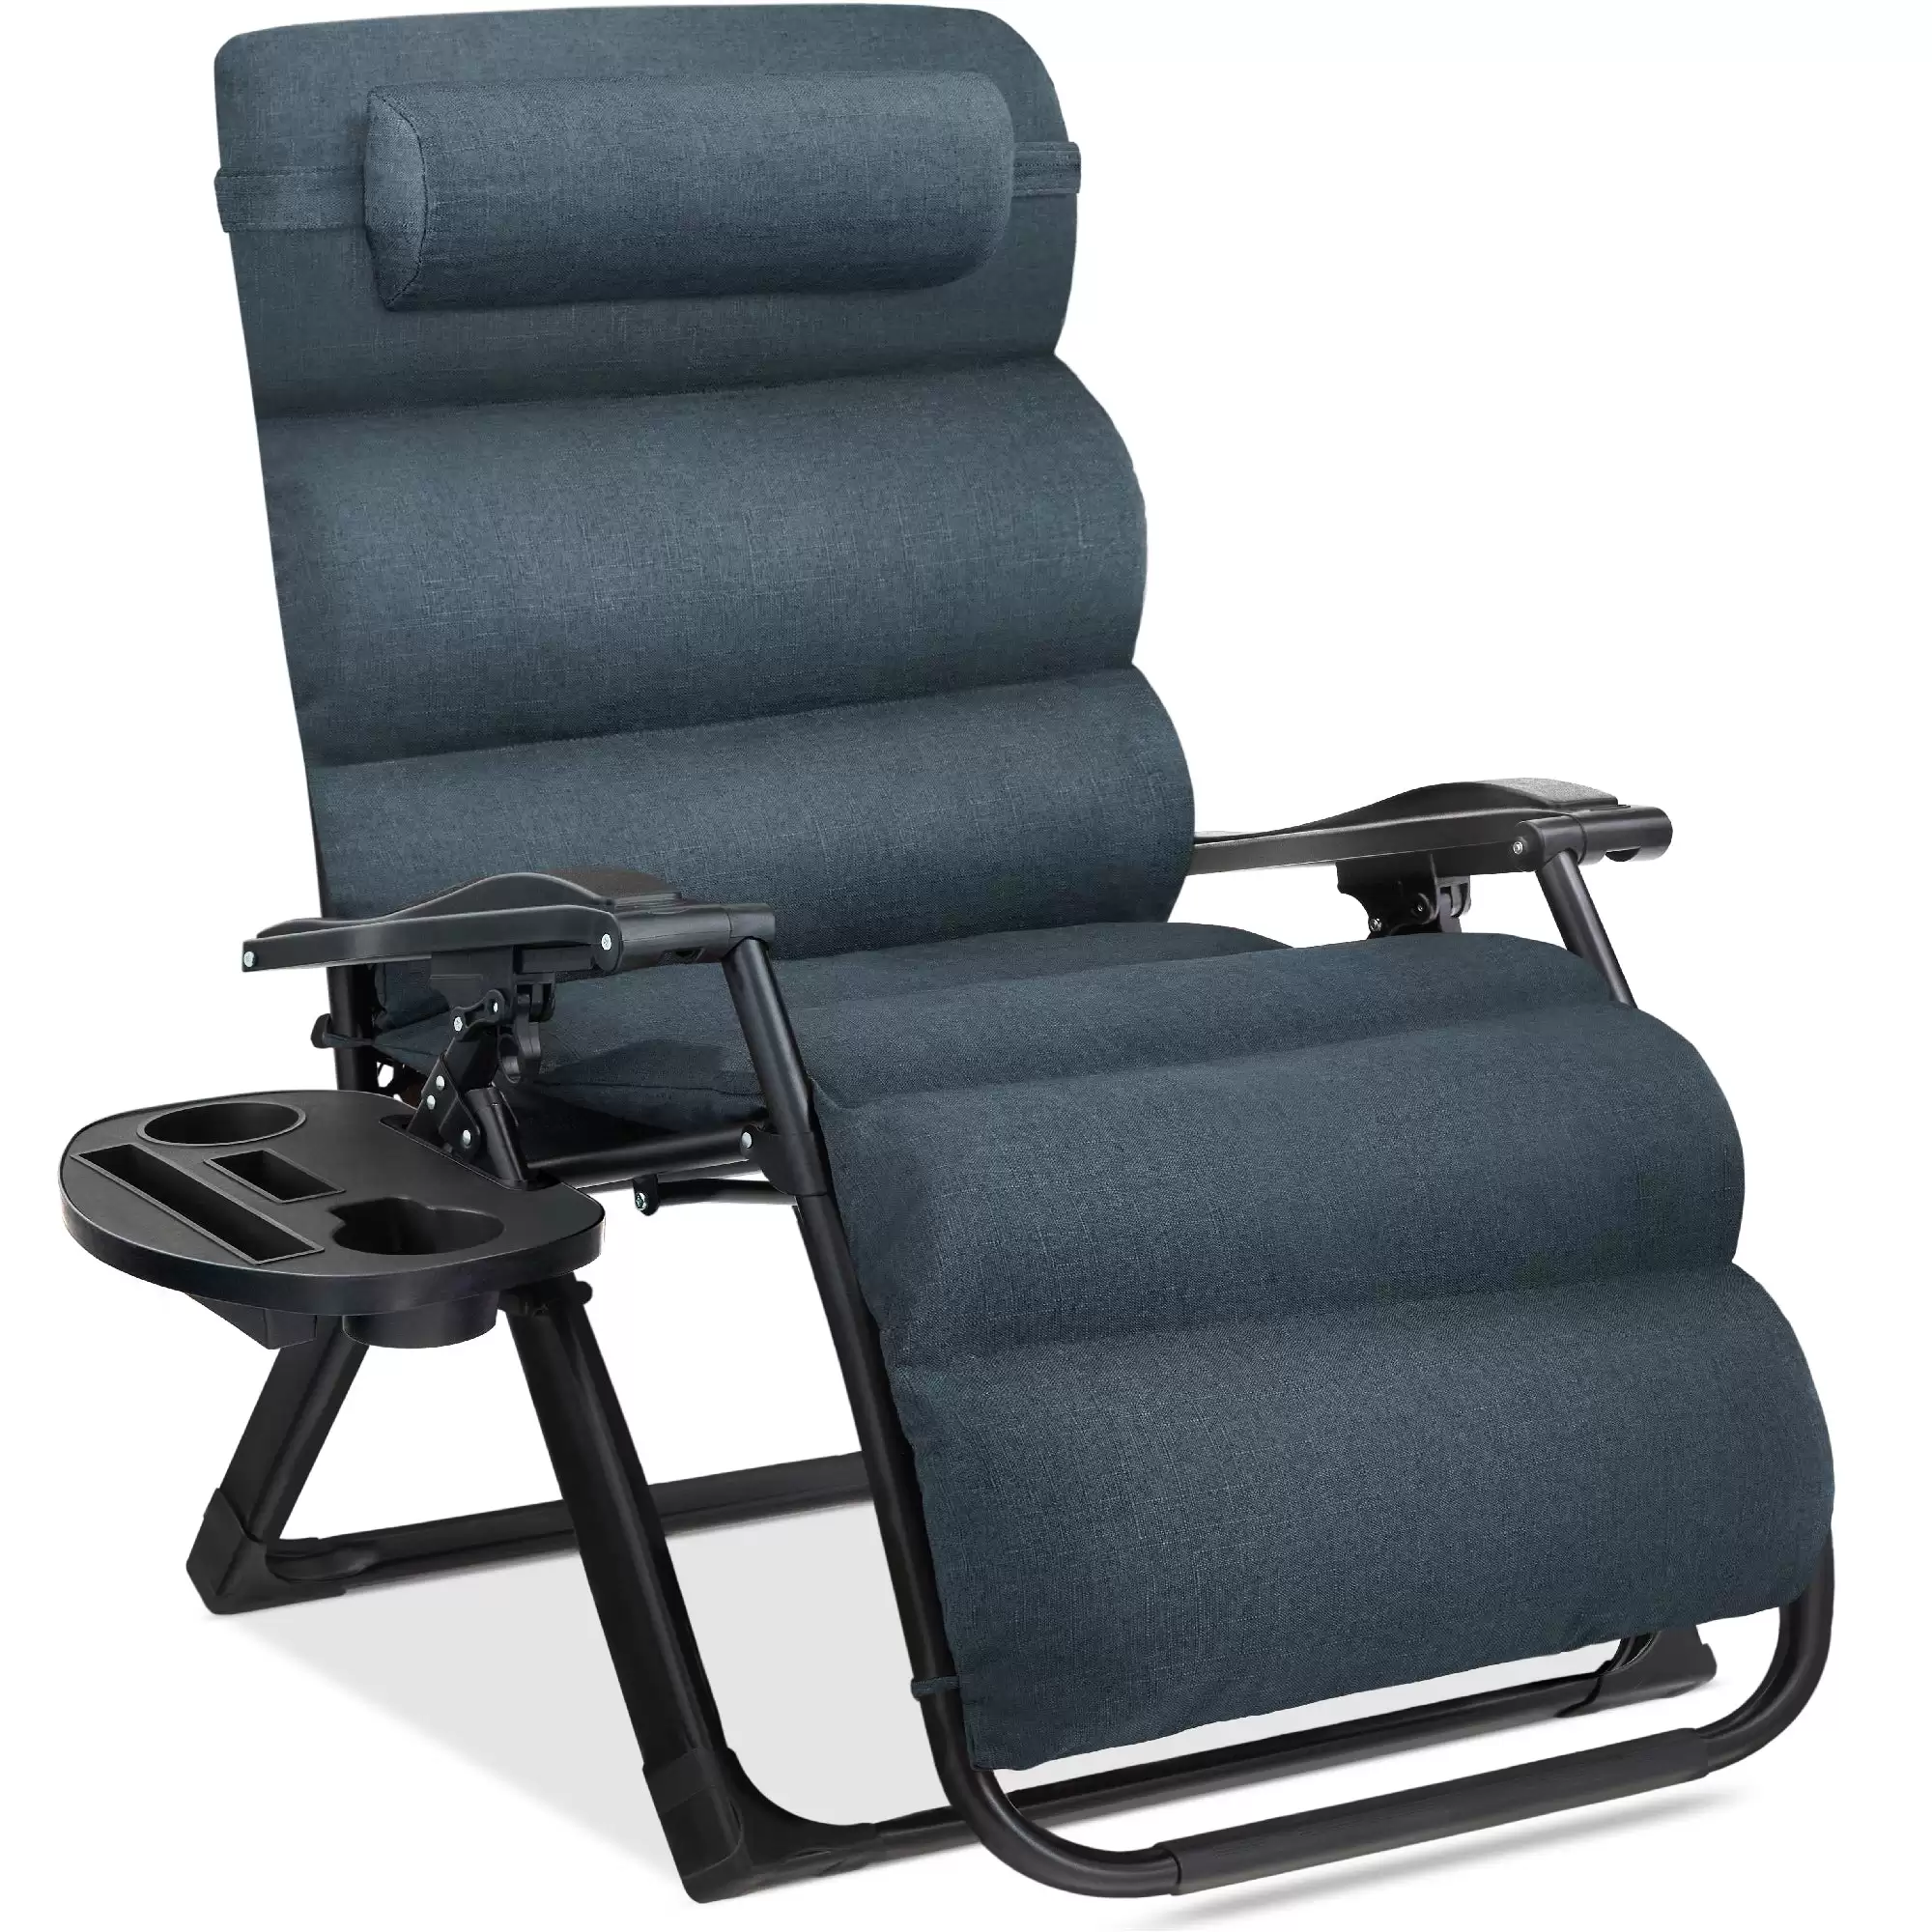 Pay $84.99 Oversized Zero Gravity Chair, Folding Outdoor Recliner W/ Removable Cushion At Bestchoiceproducts